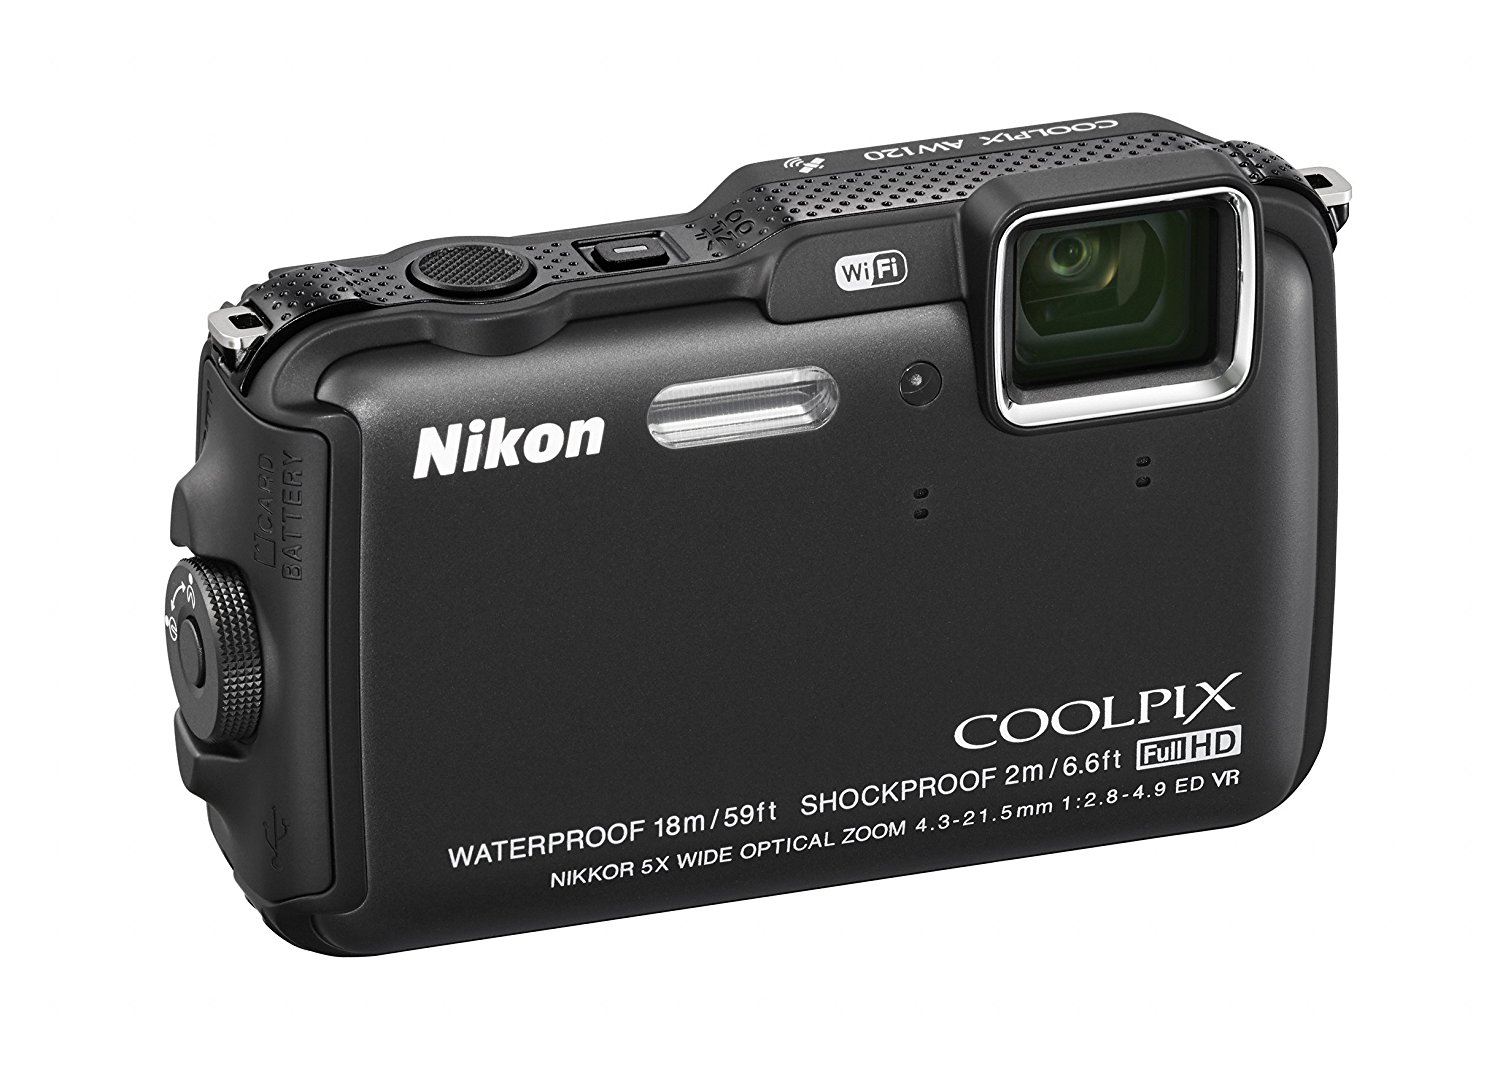 Nikon Coolpix Aw120 161 Mp Wi Fi And Waterproof Digital Camera With Gps And Full Hd 1080p Video 4547